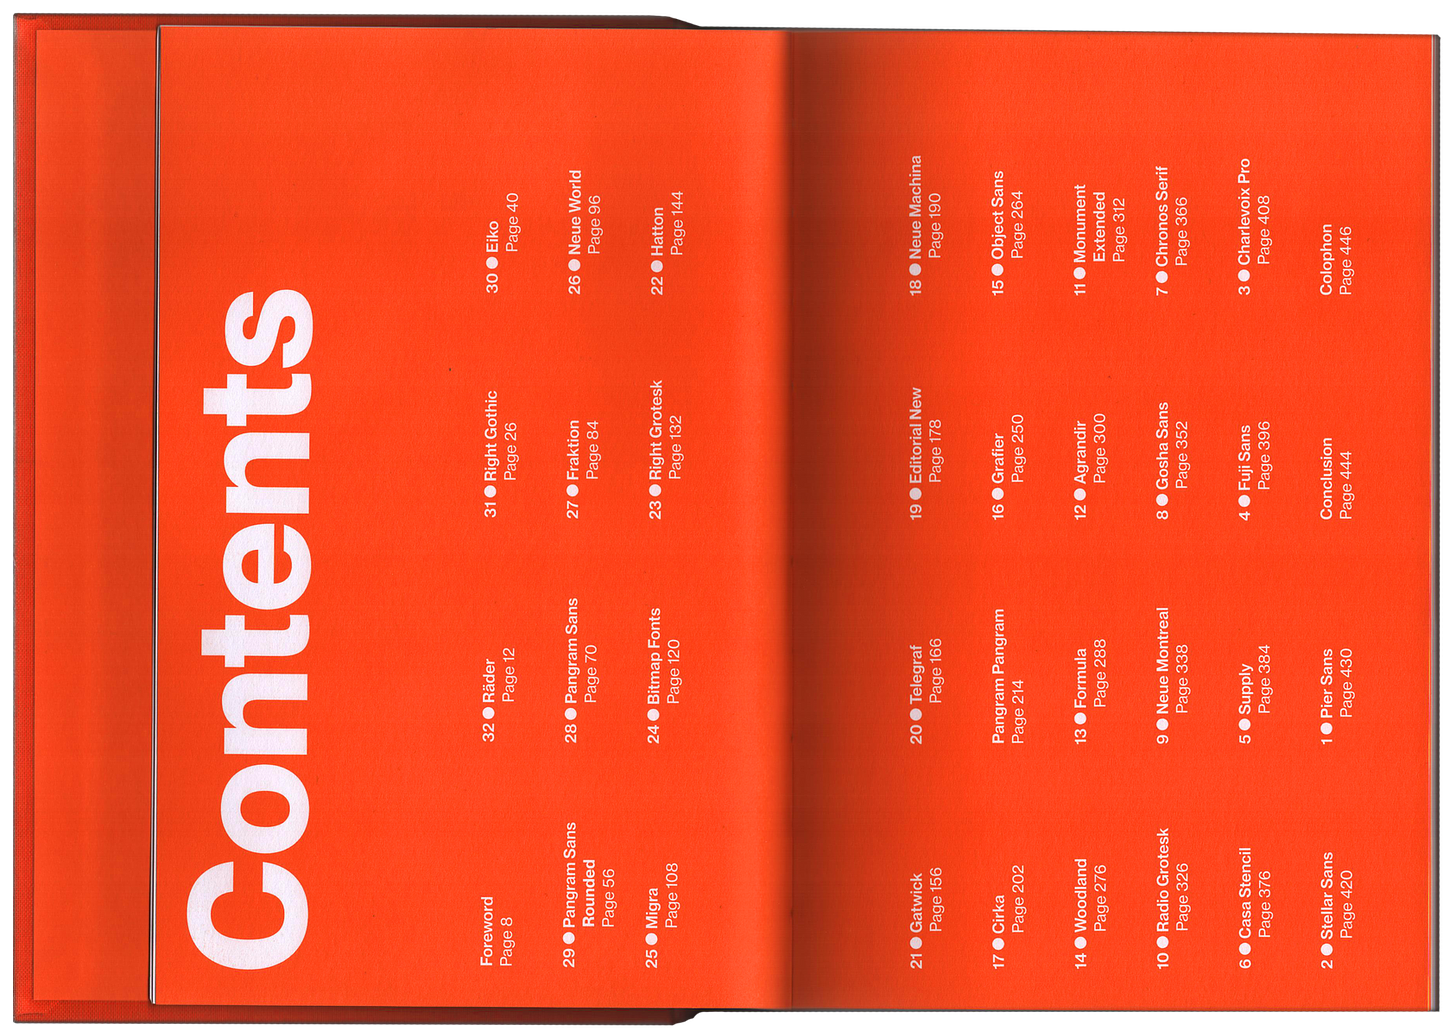 The table of contents from the Pangram Pangram PP32 Specimen Book